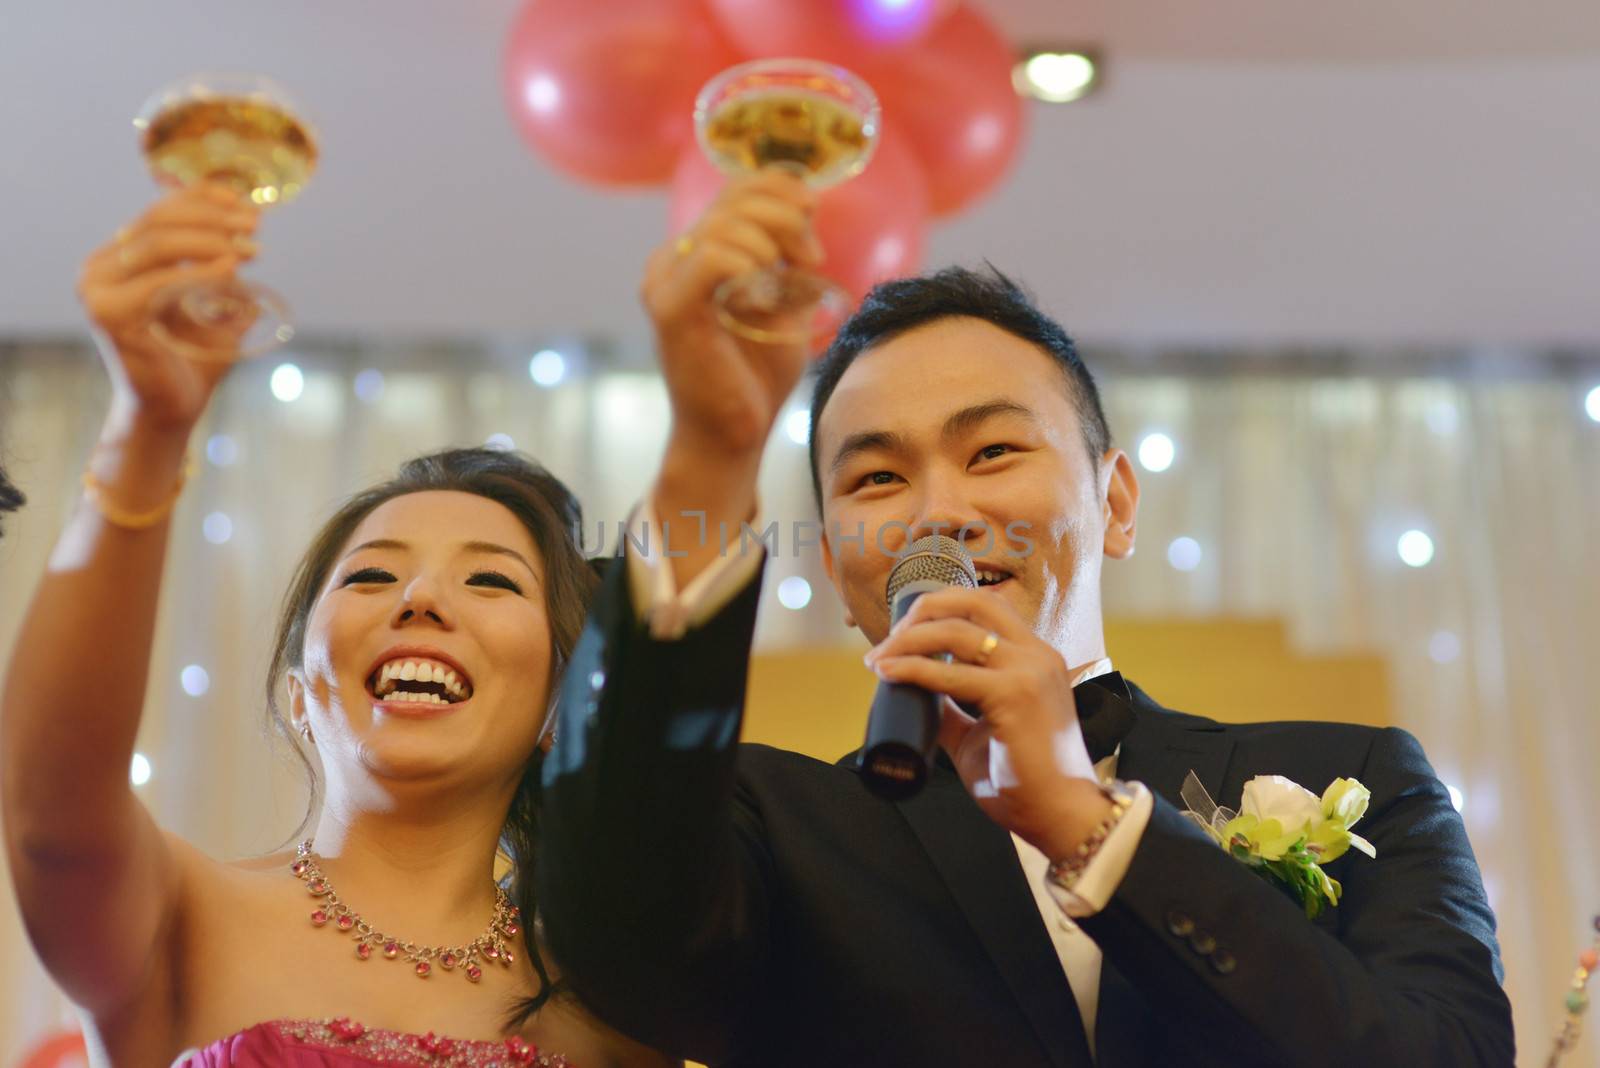 Wedding party champagne toasting by szefei